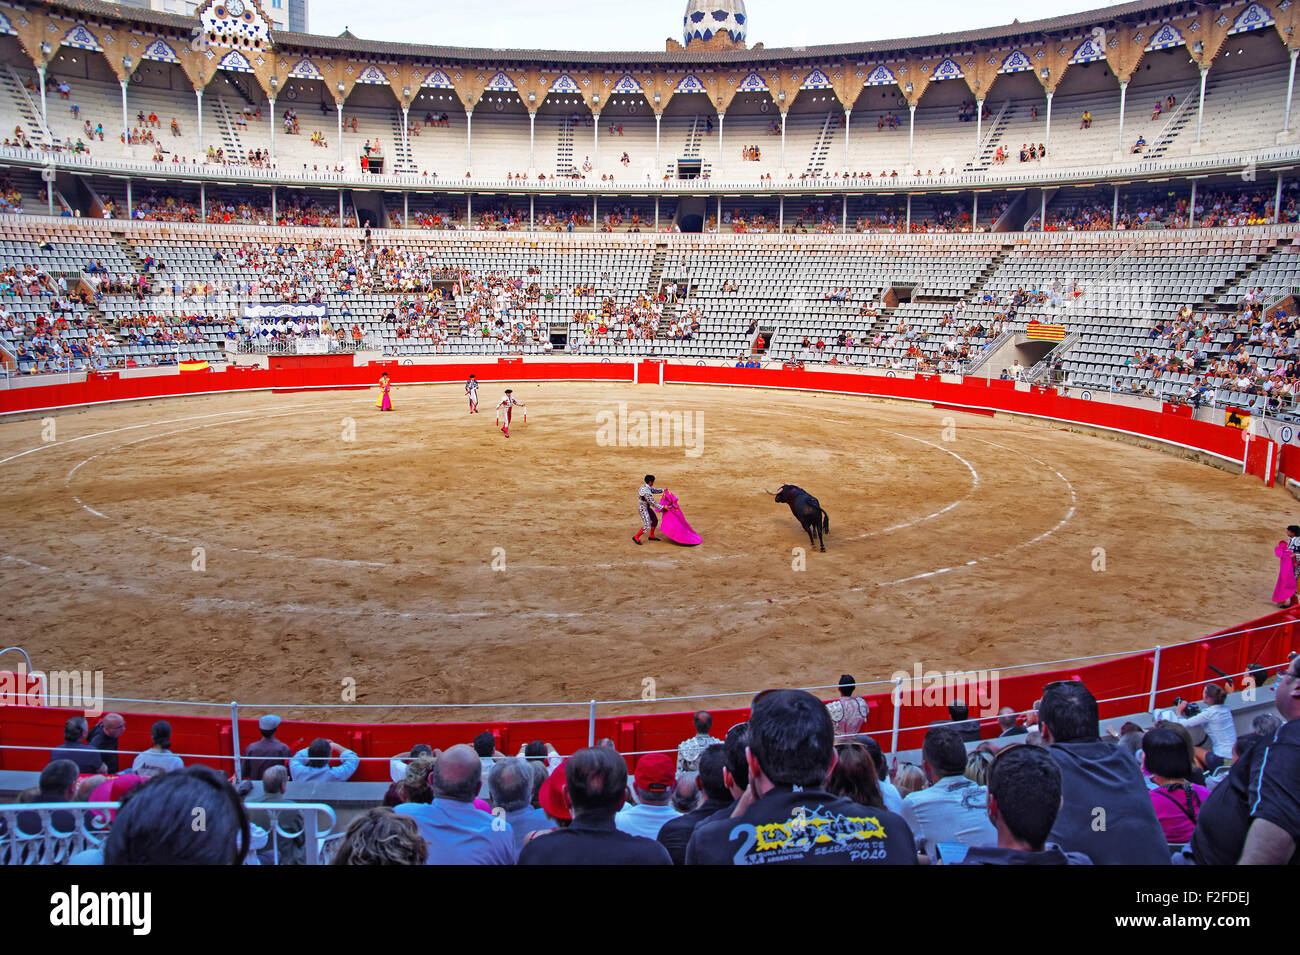 BARCELONA, SPAIN - AUGUST 01, 2010: Spanish torero is performing a bullfight at the bullfighting arena in Barcelona (Spain). 'Co Stock Photo